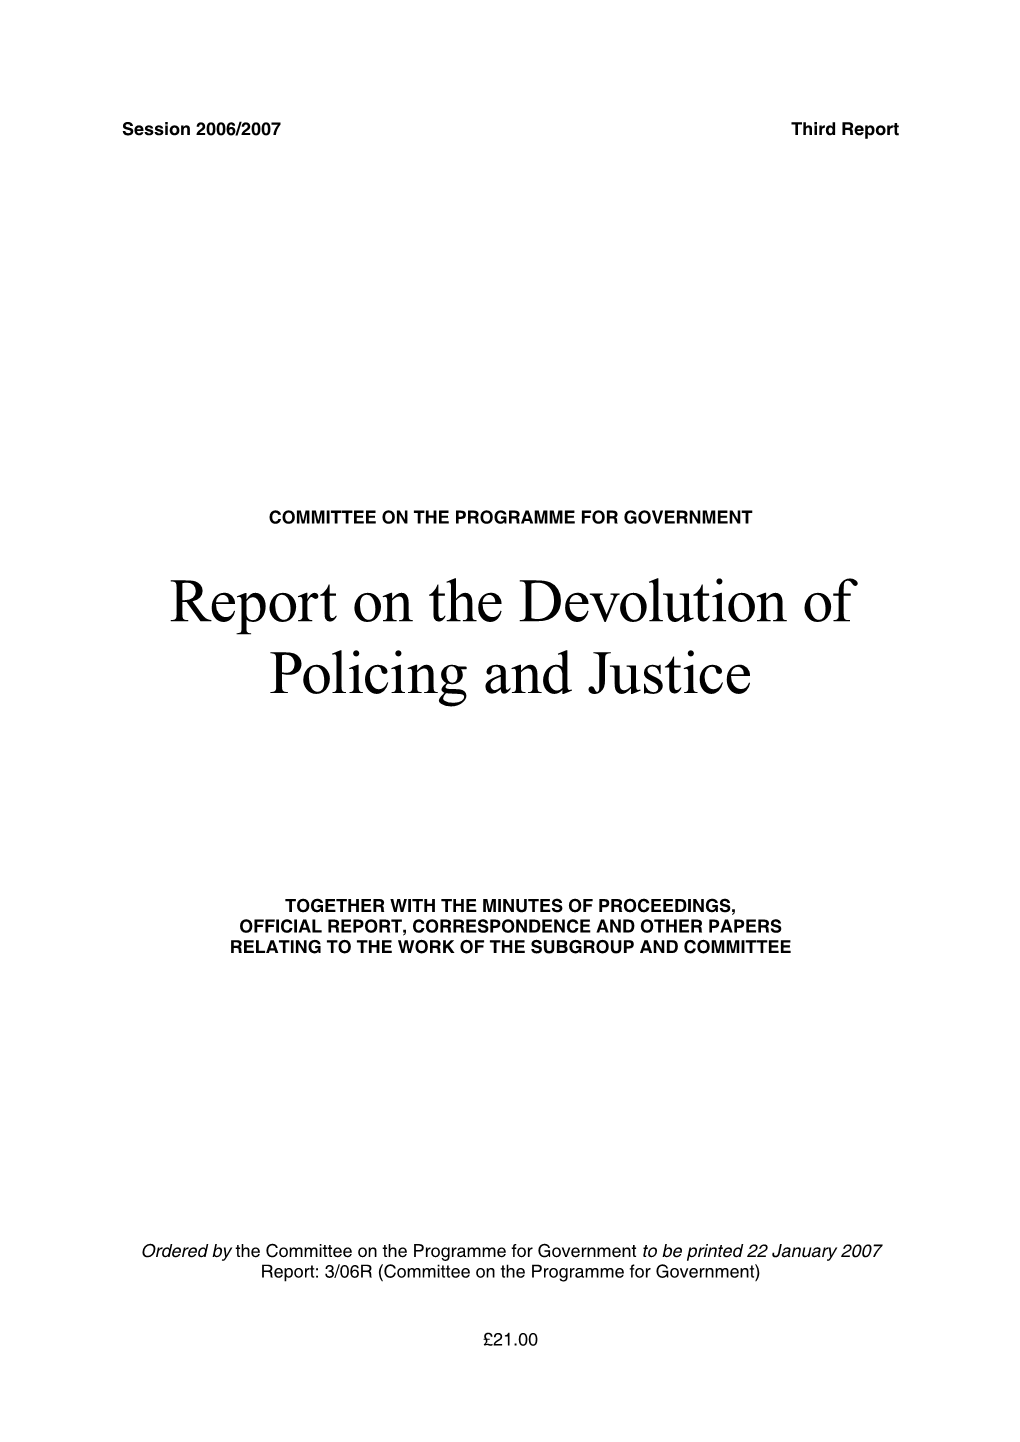 03/06R Report on the Devolution of Policing and Justice